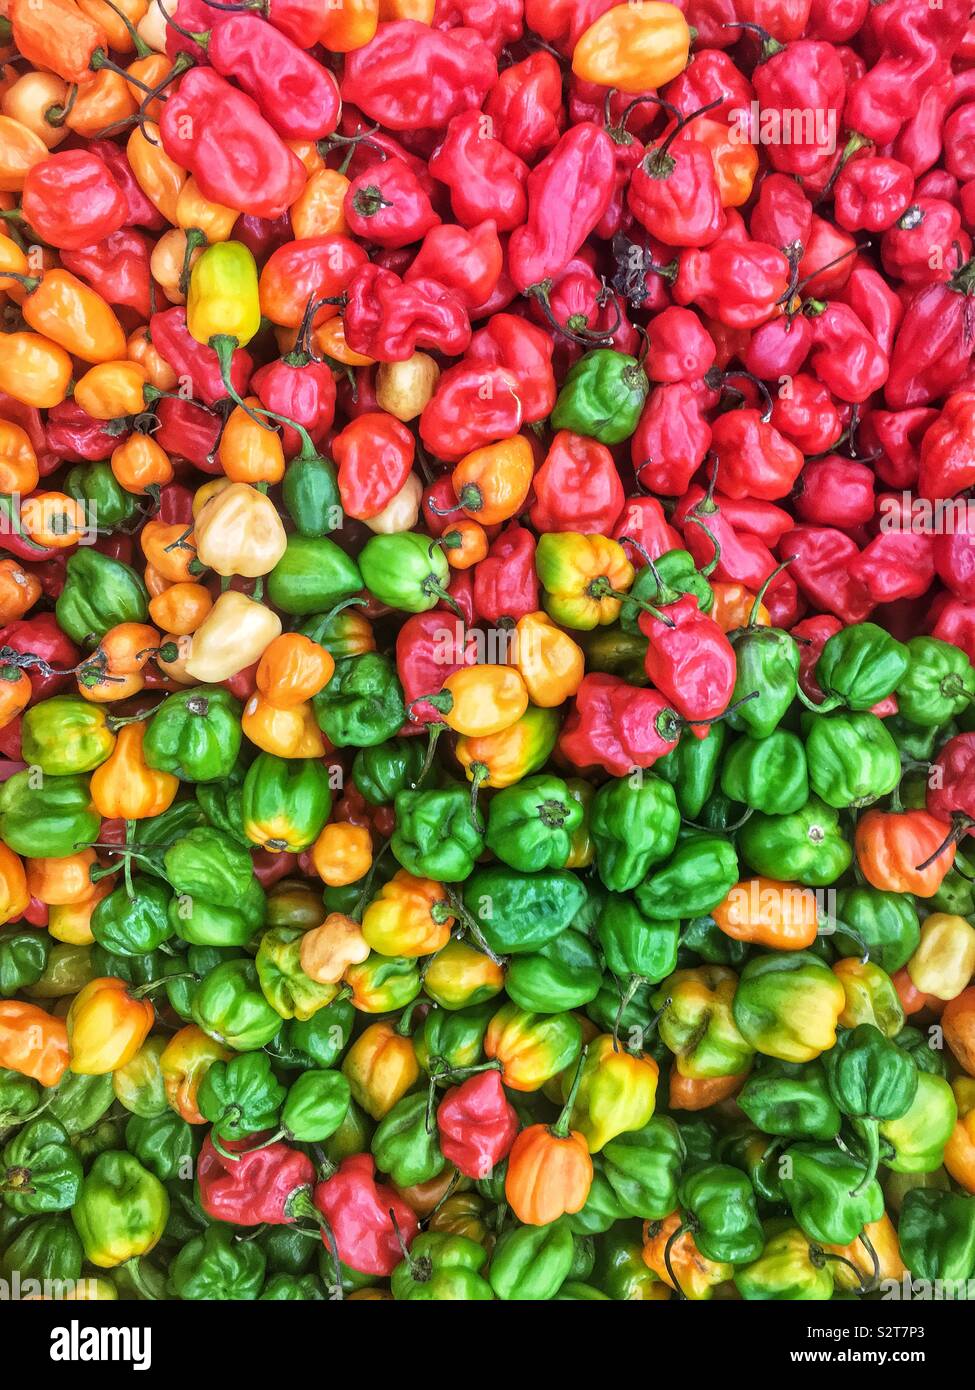 Variety of farm fresh spicy red, orange, yellow, and green habanero peppers. Stock Photo